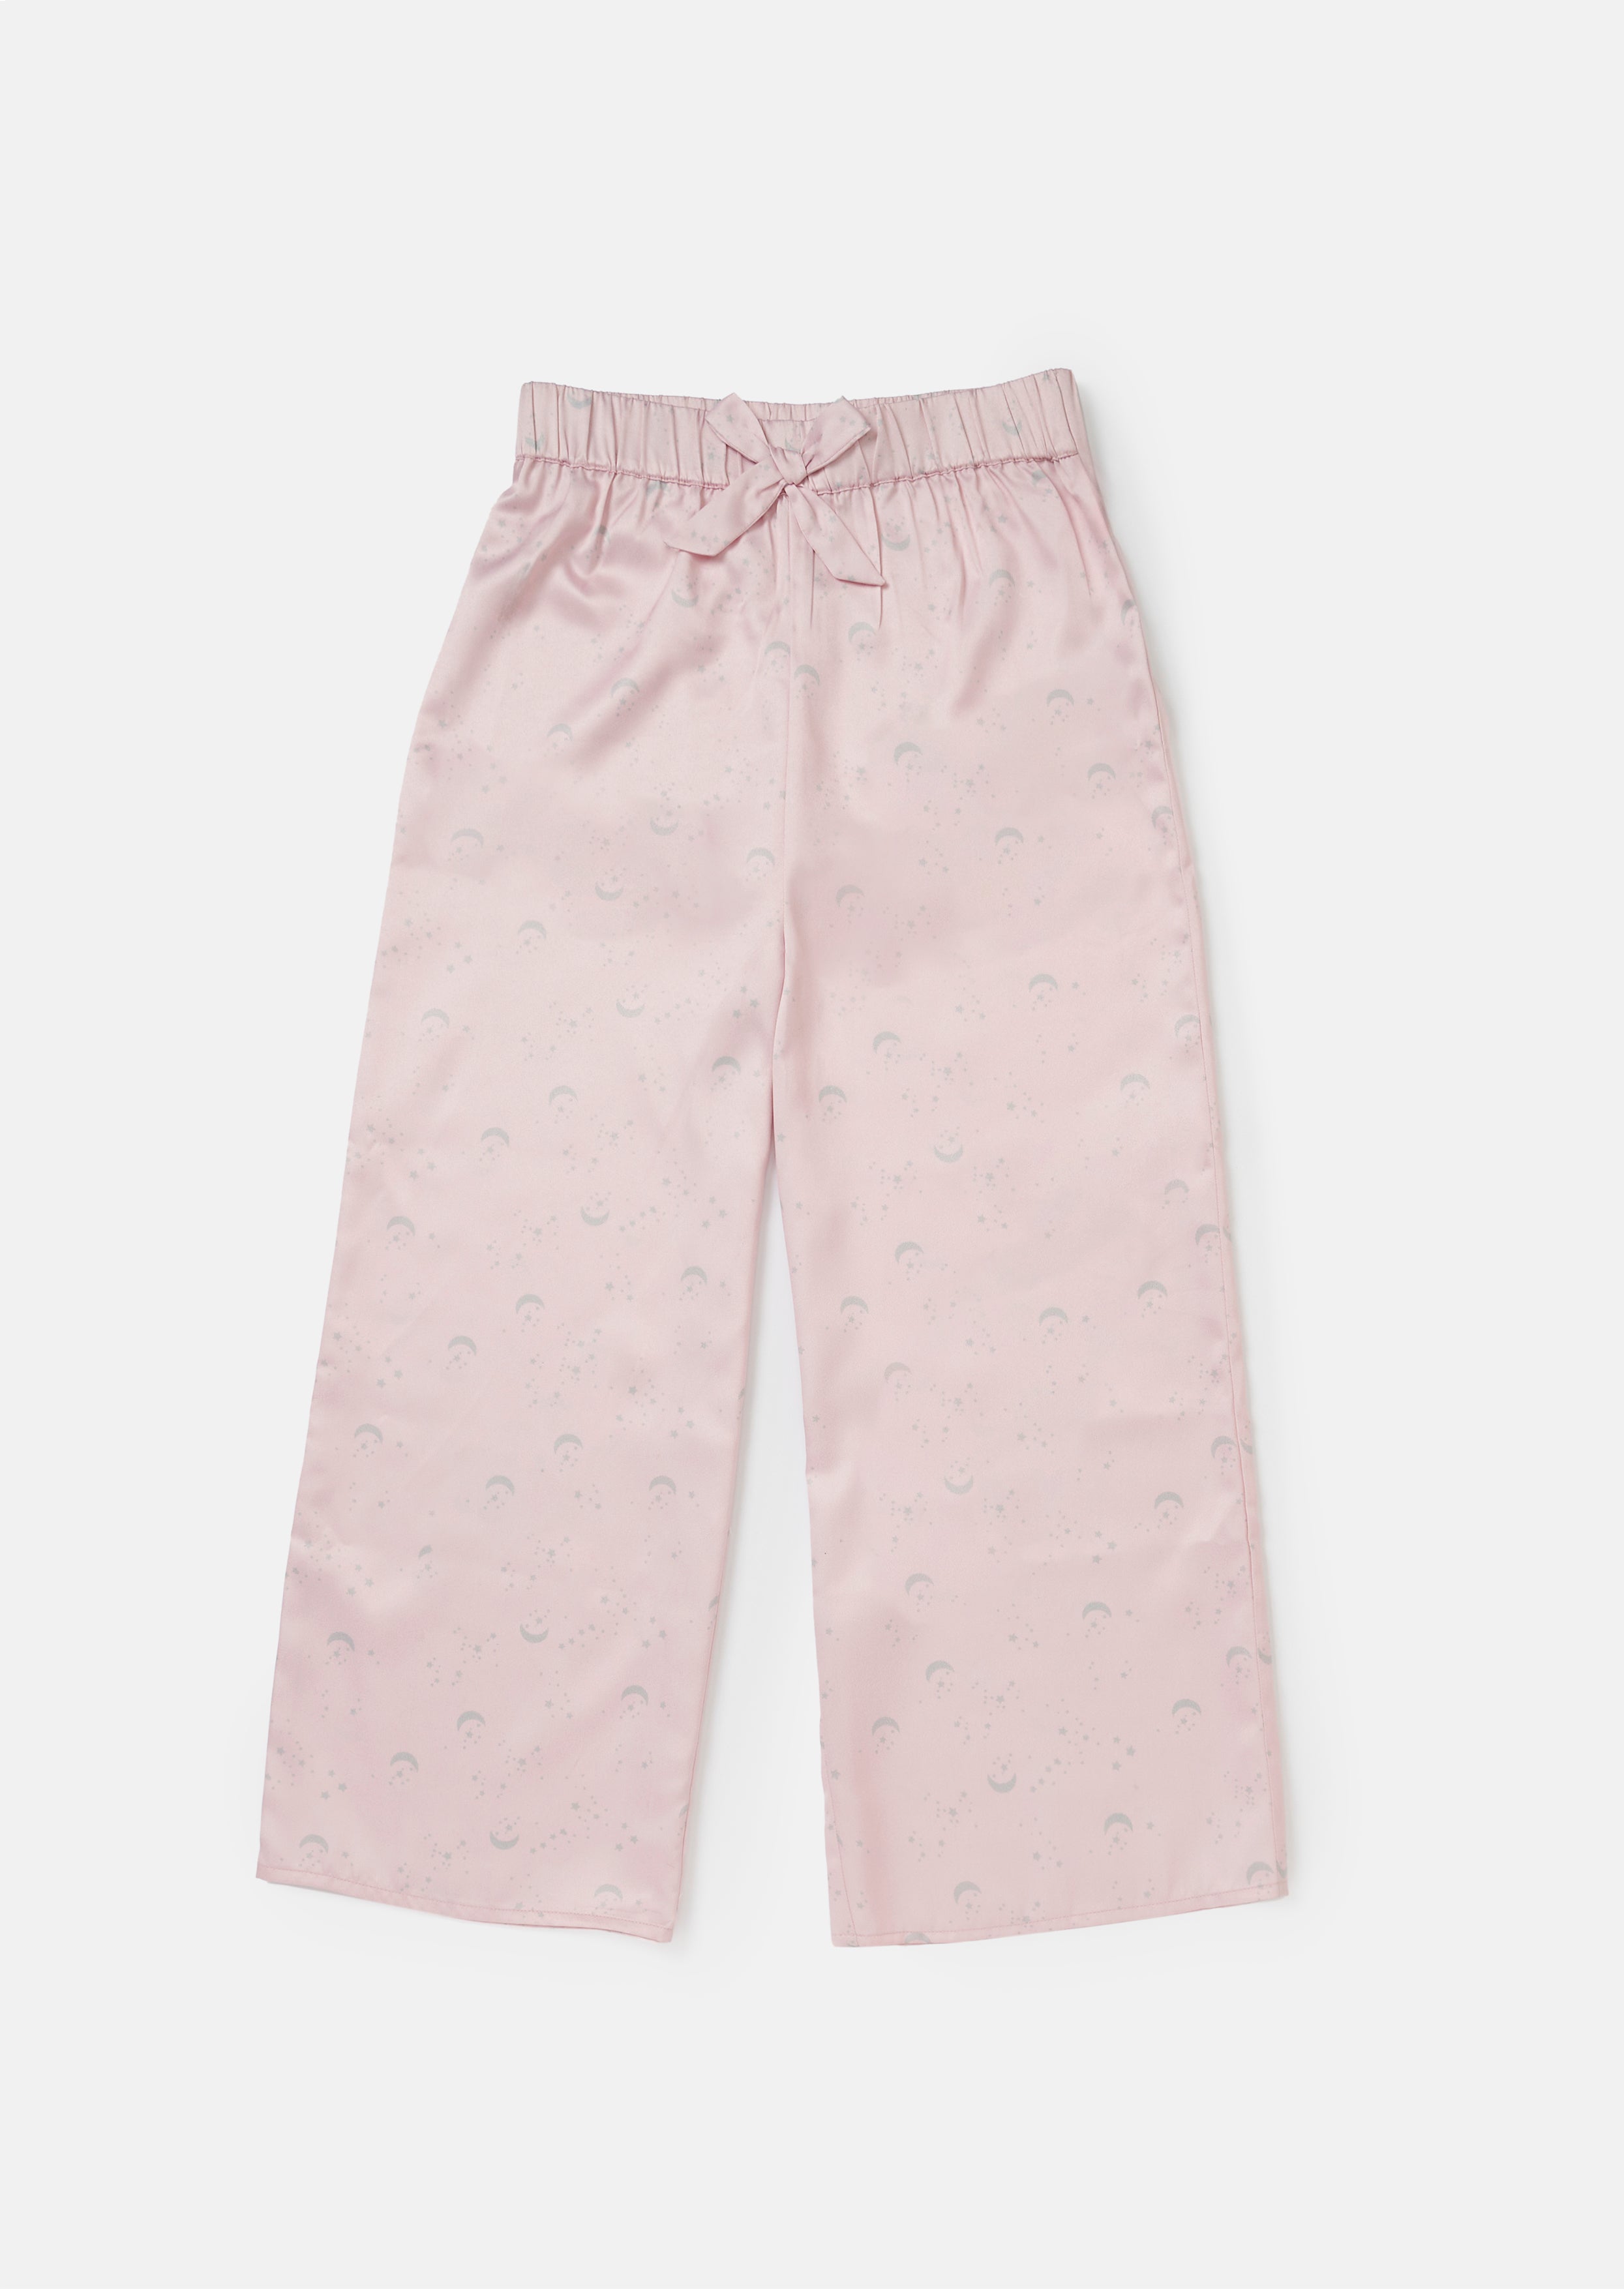 Girls Moon and Stars Printed Pink Co-ordinated Set